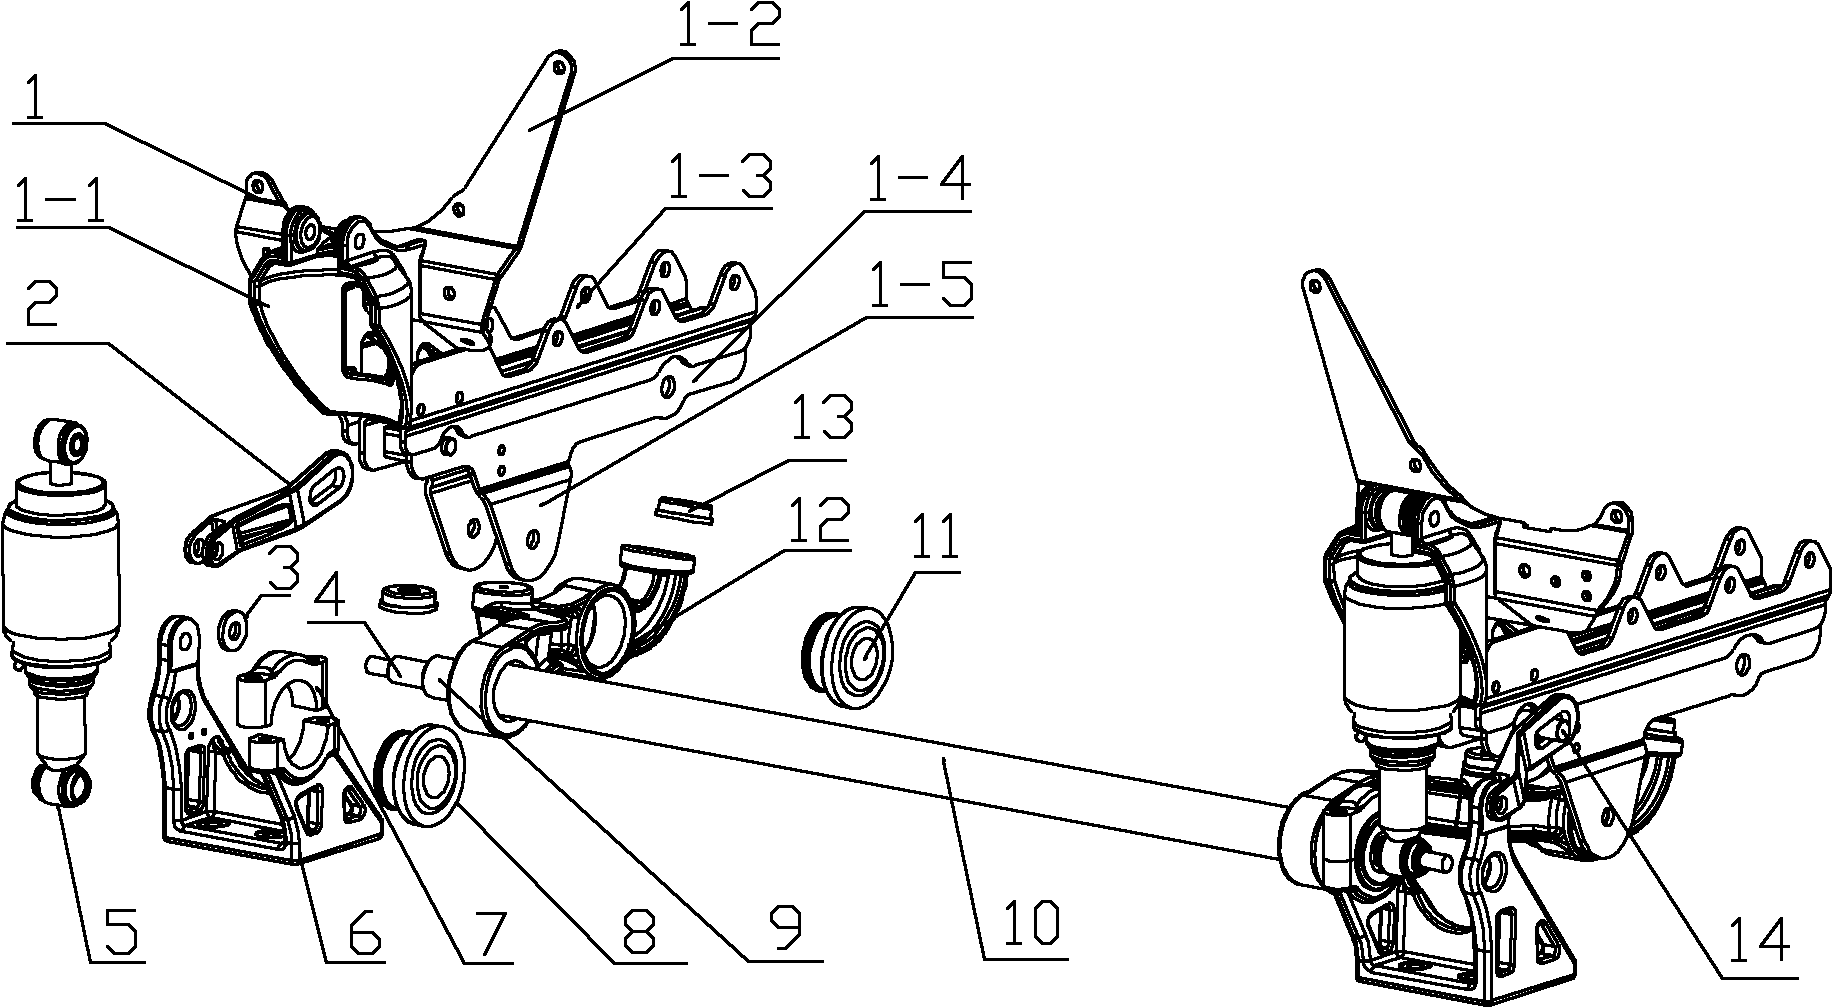 Suspension device in front of vehicle driving cab and heavy vehicle